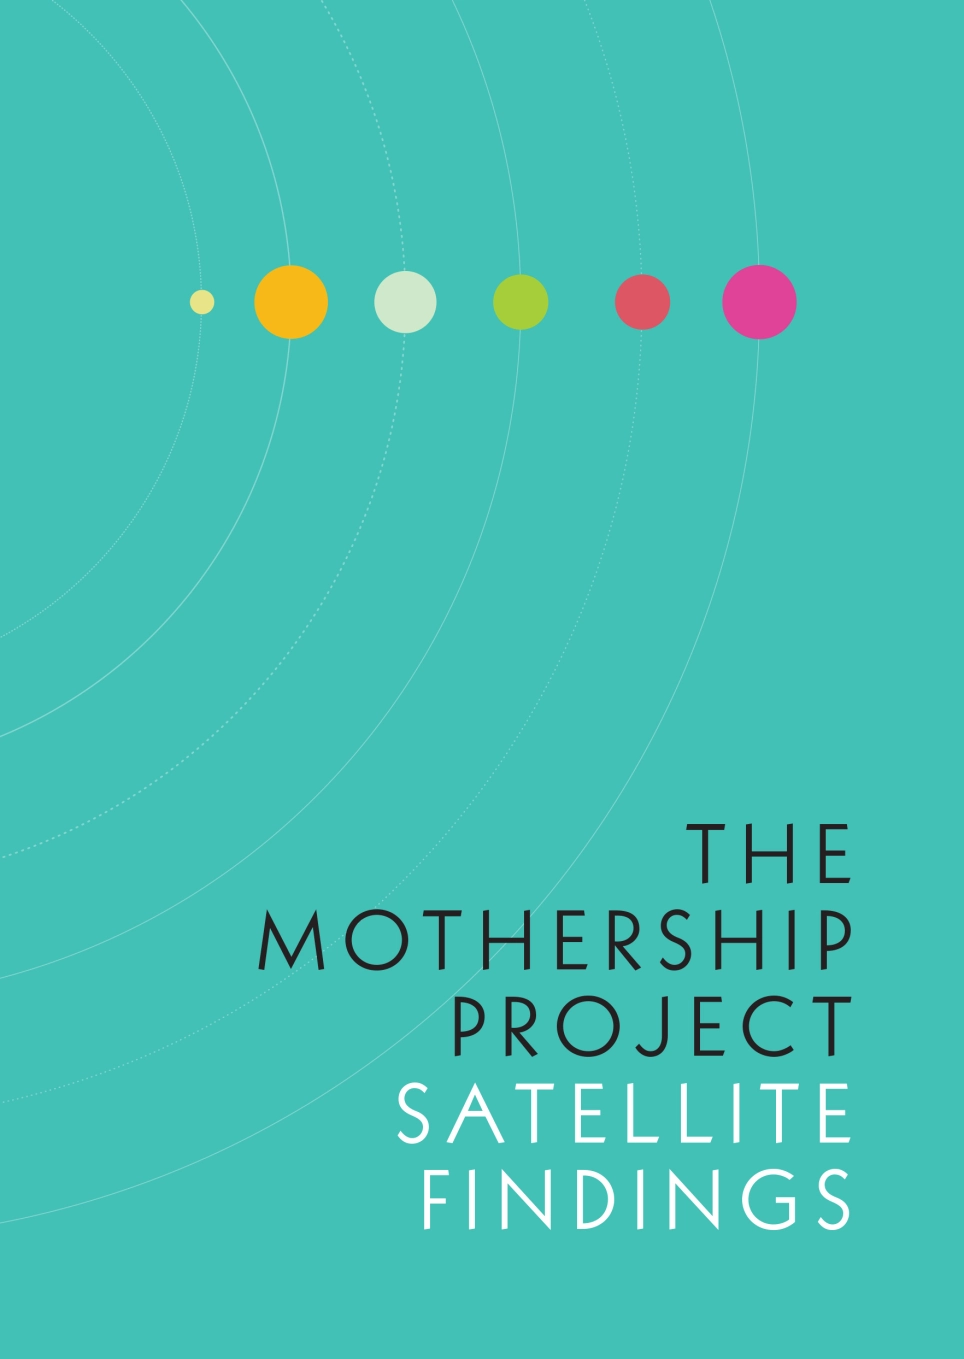 Satellite Findings The Mothership Project